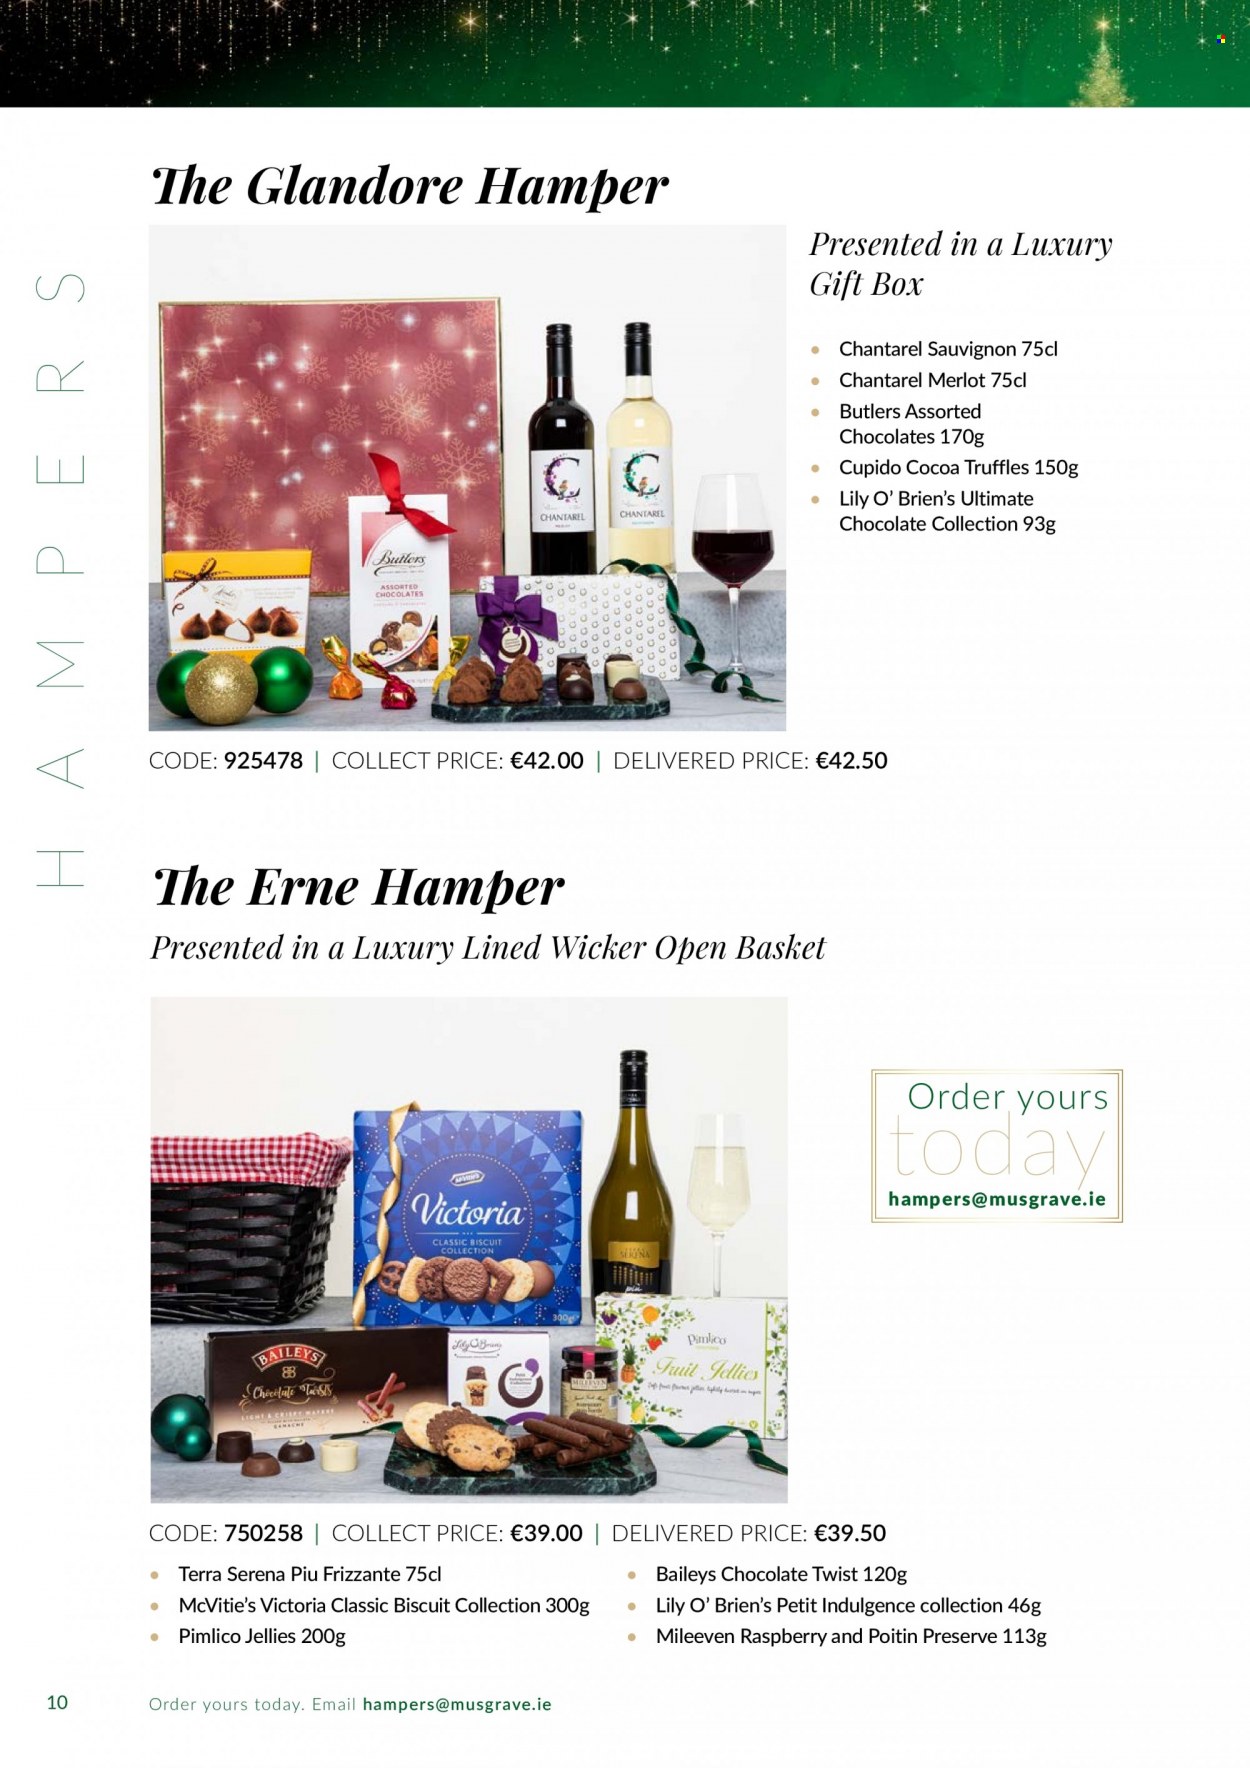 thumbnail - MUSGRAVE Market Place offer  - Sales products - hamper, chocolate, truffles, biscuit, Victoria Sponge, cocoa, red wine, wine, Merlot, Baileys, basket, gift box. Page 10.